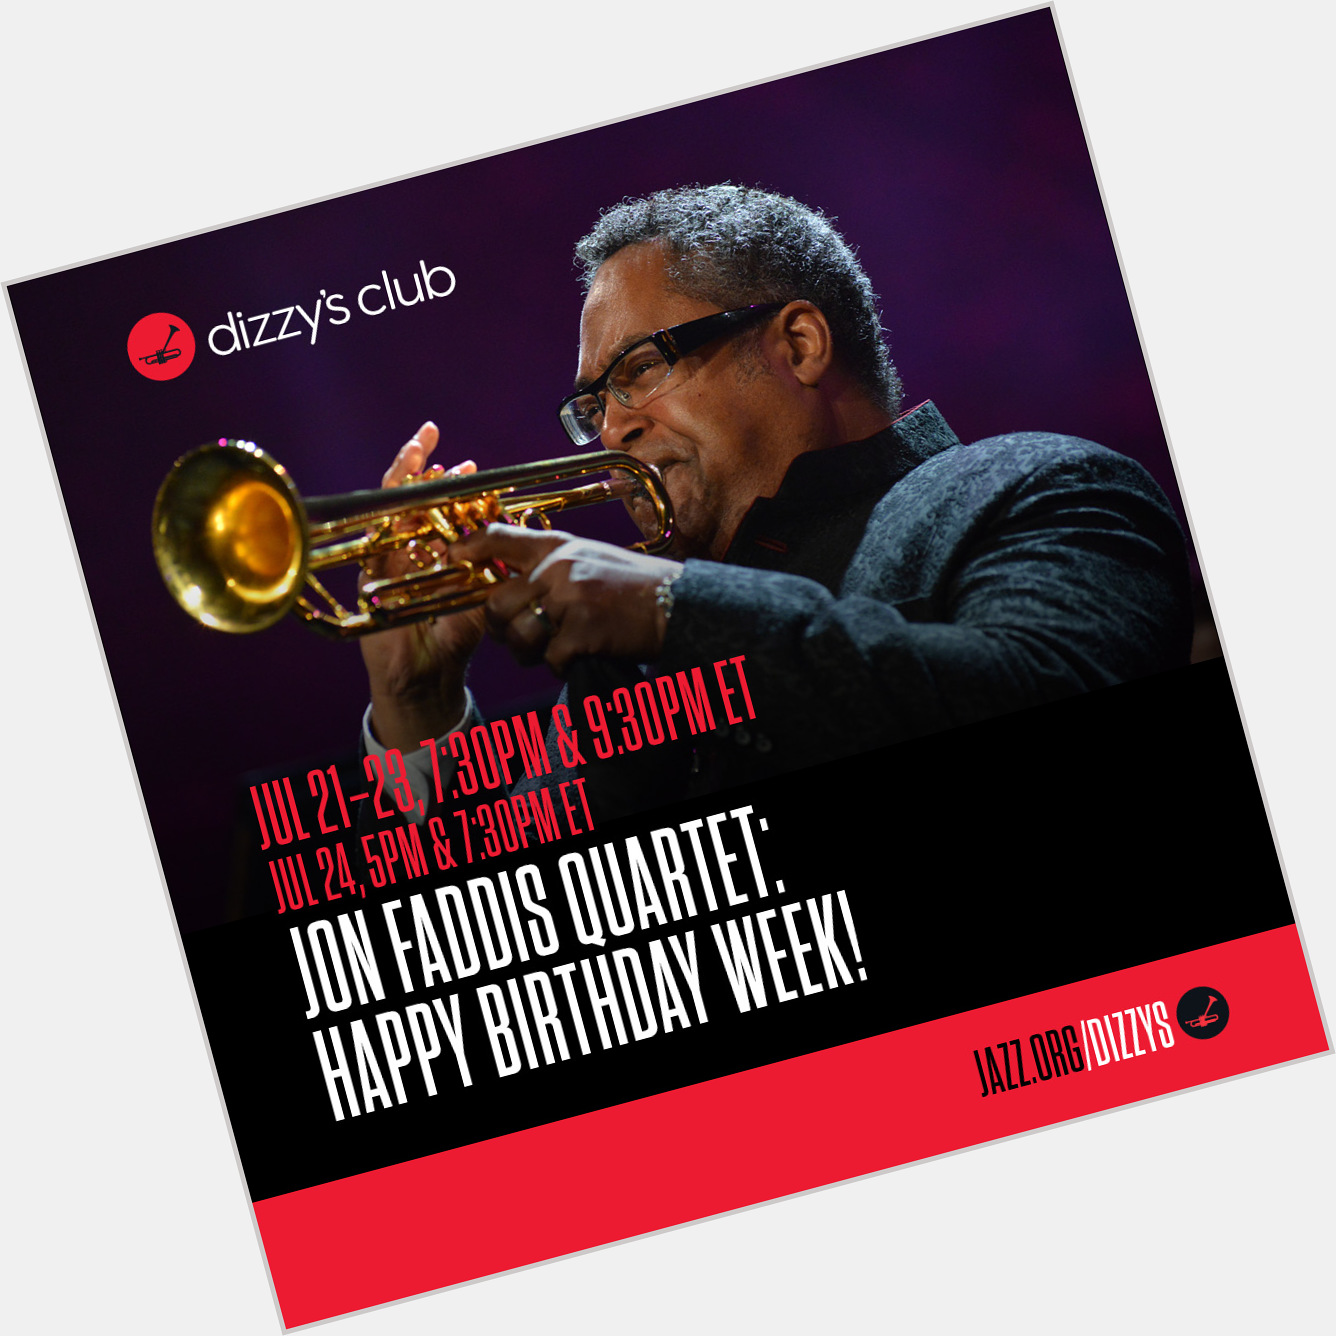 July 21-24 at Jon Faddis Quartet: Happy Birthday Week! 

For info and tickets:  